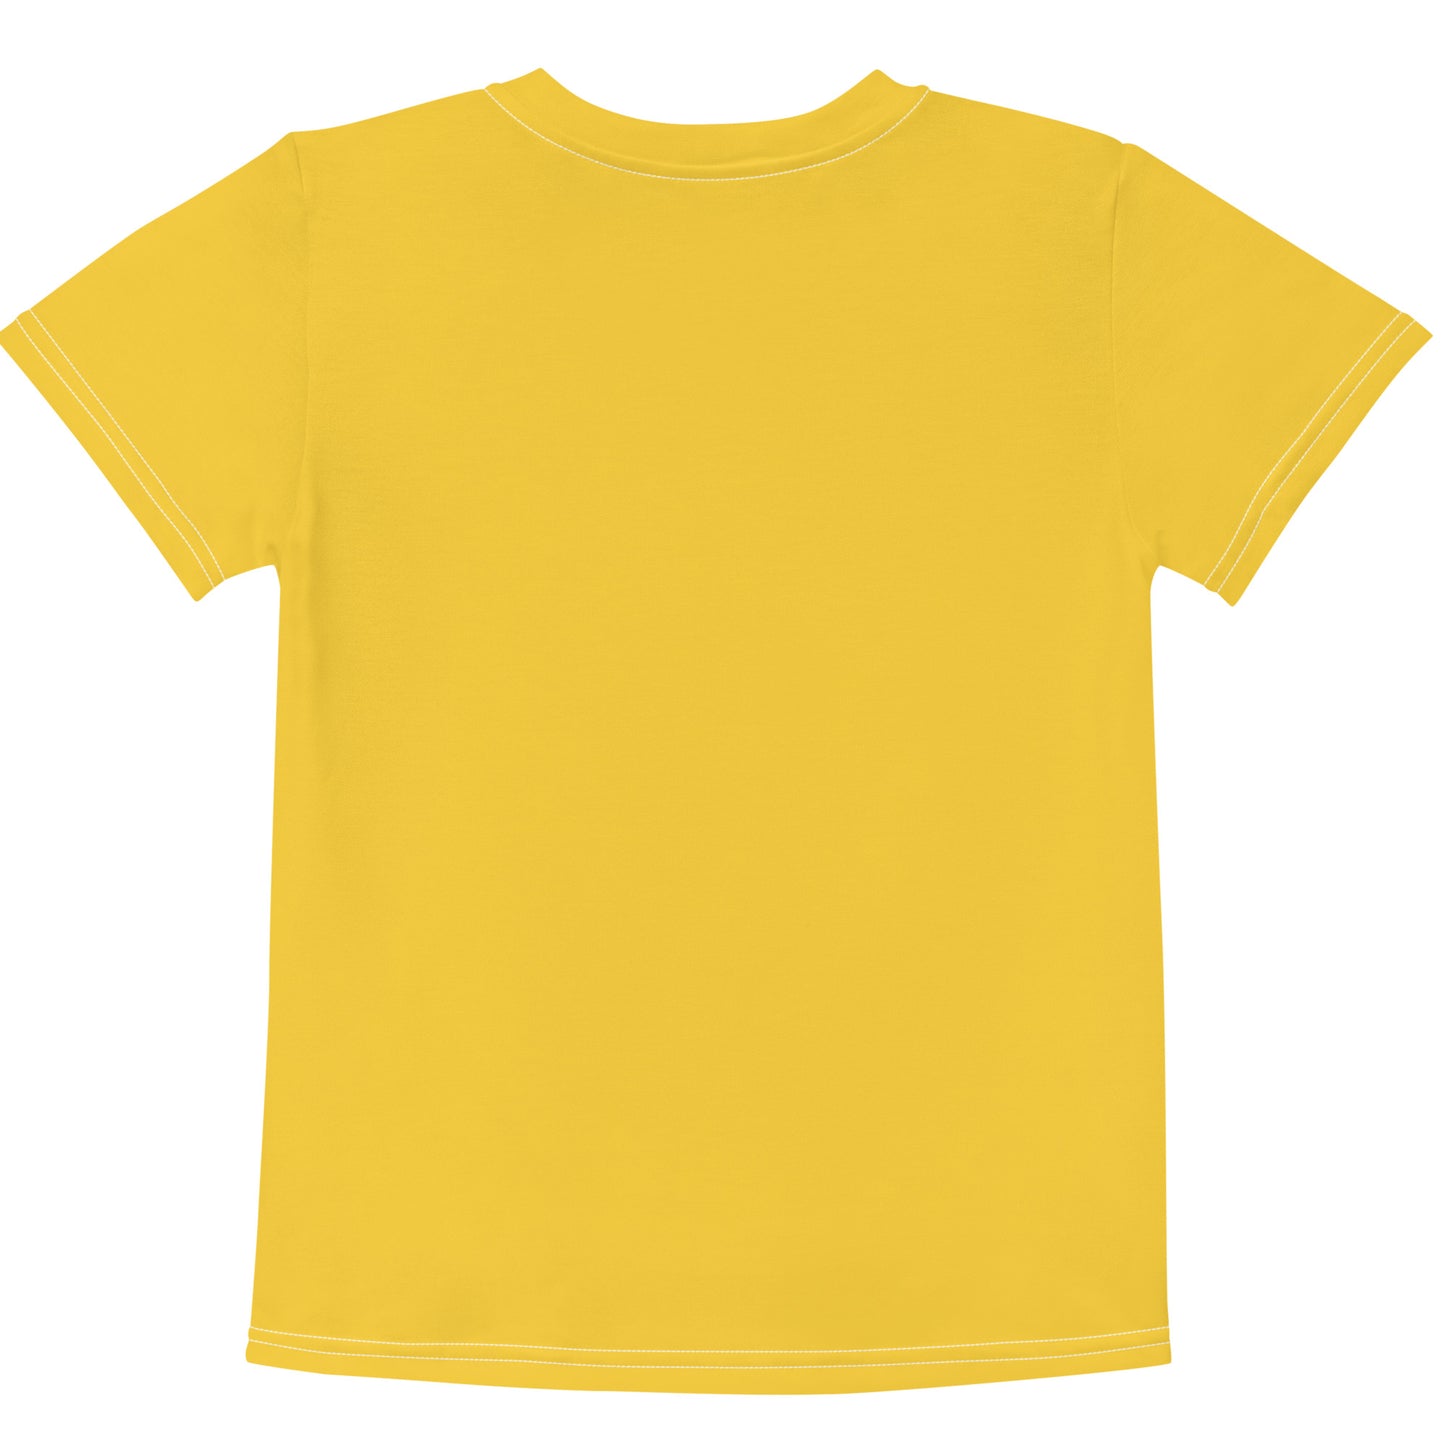 Sun Bright Climate Change Global Warming Statement - Sustainably Made Kid's T-Shirt